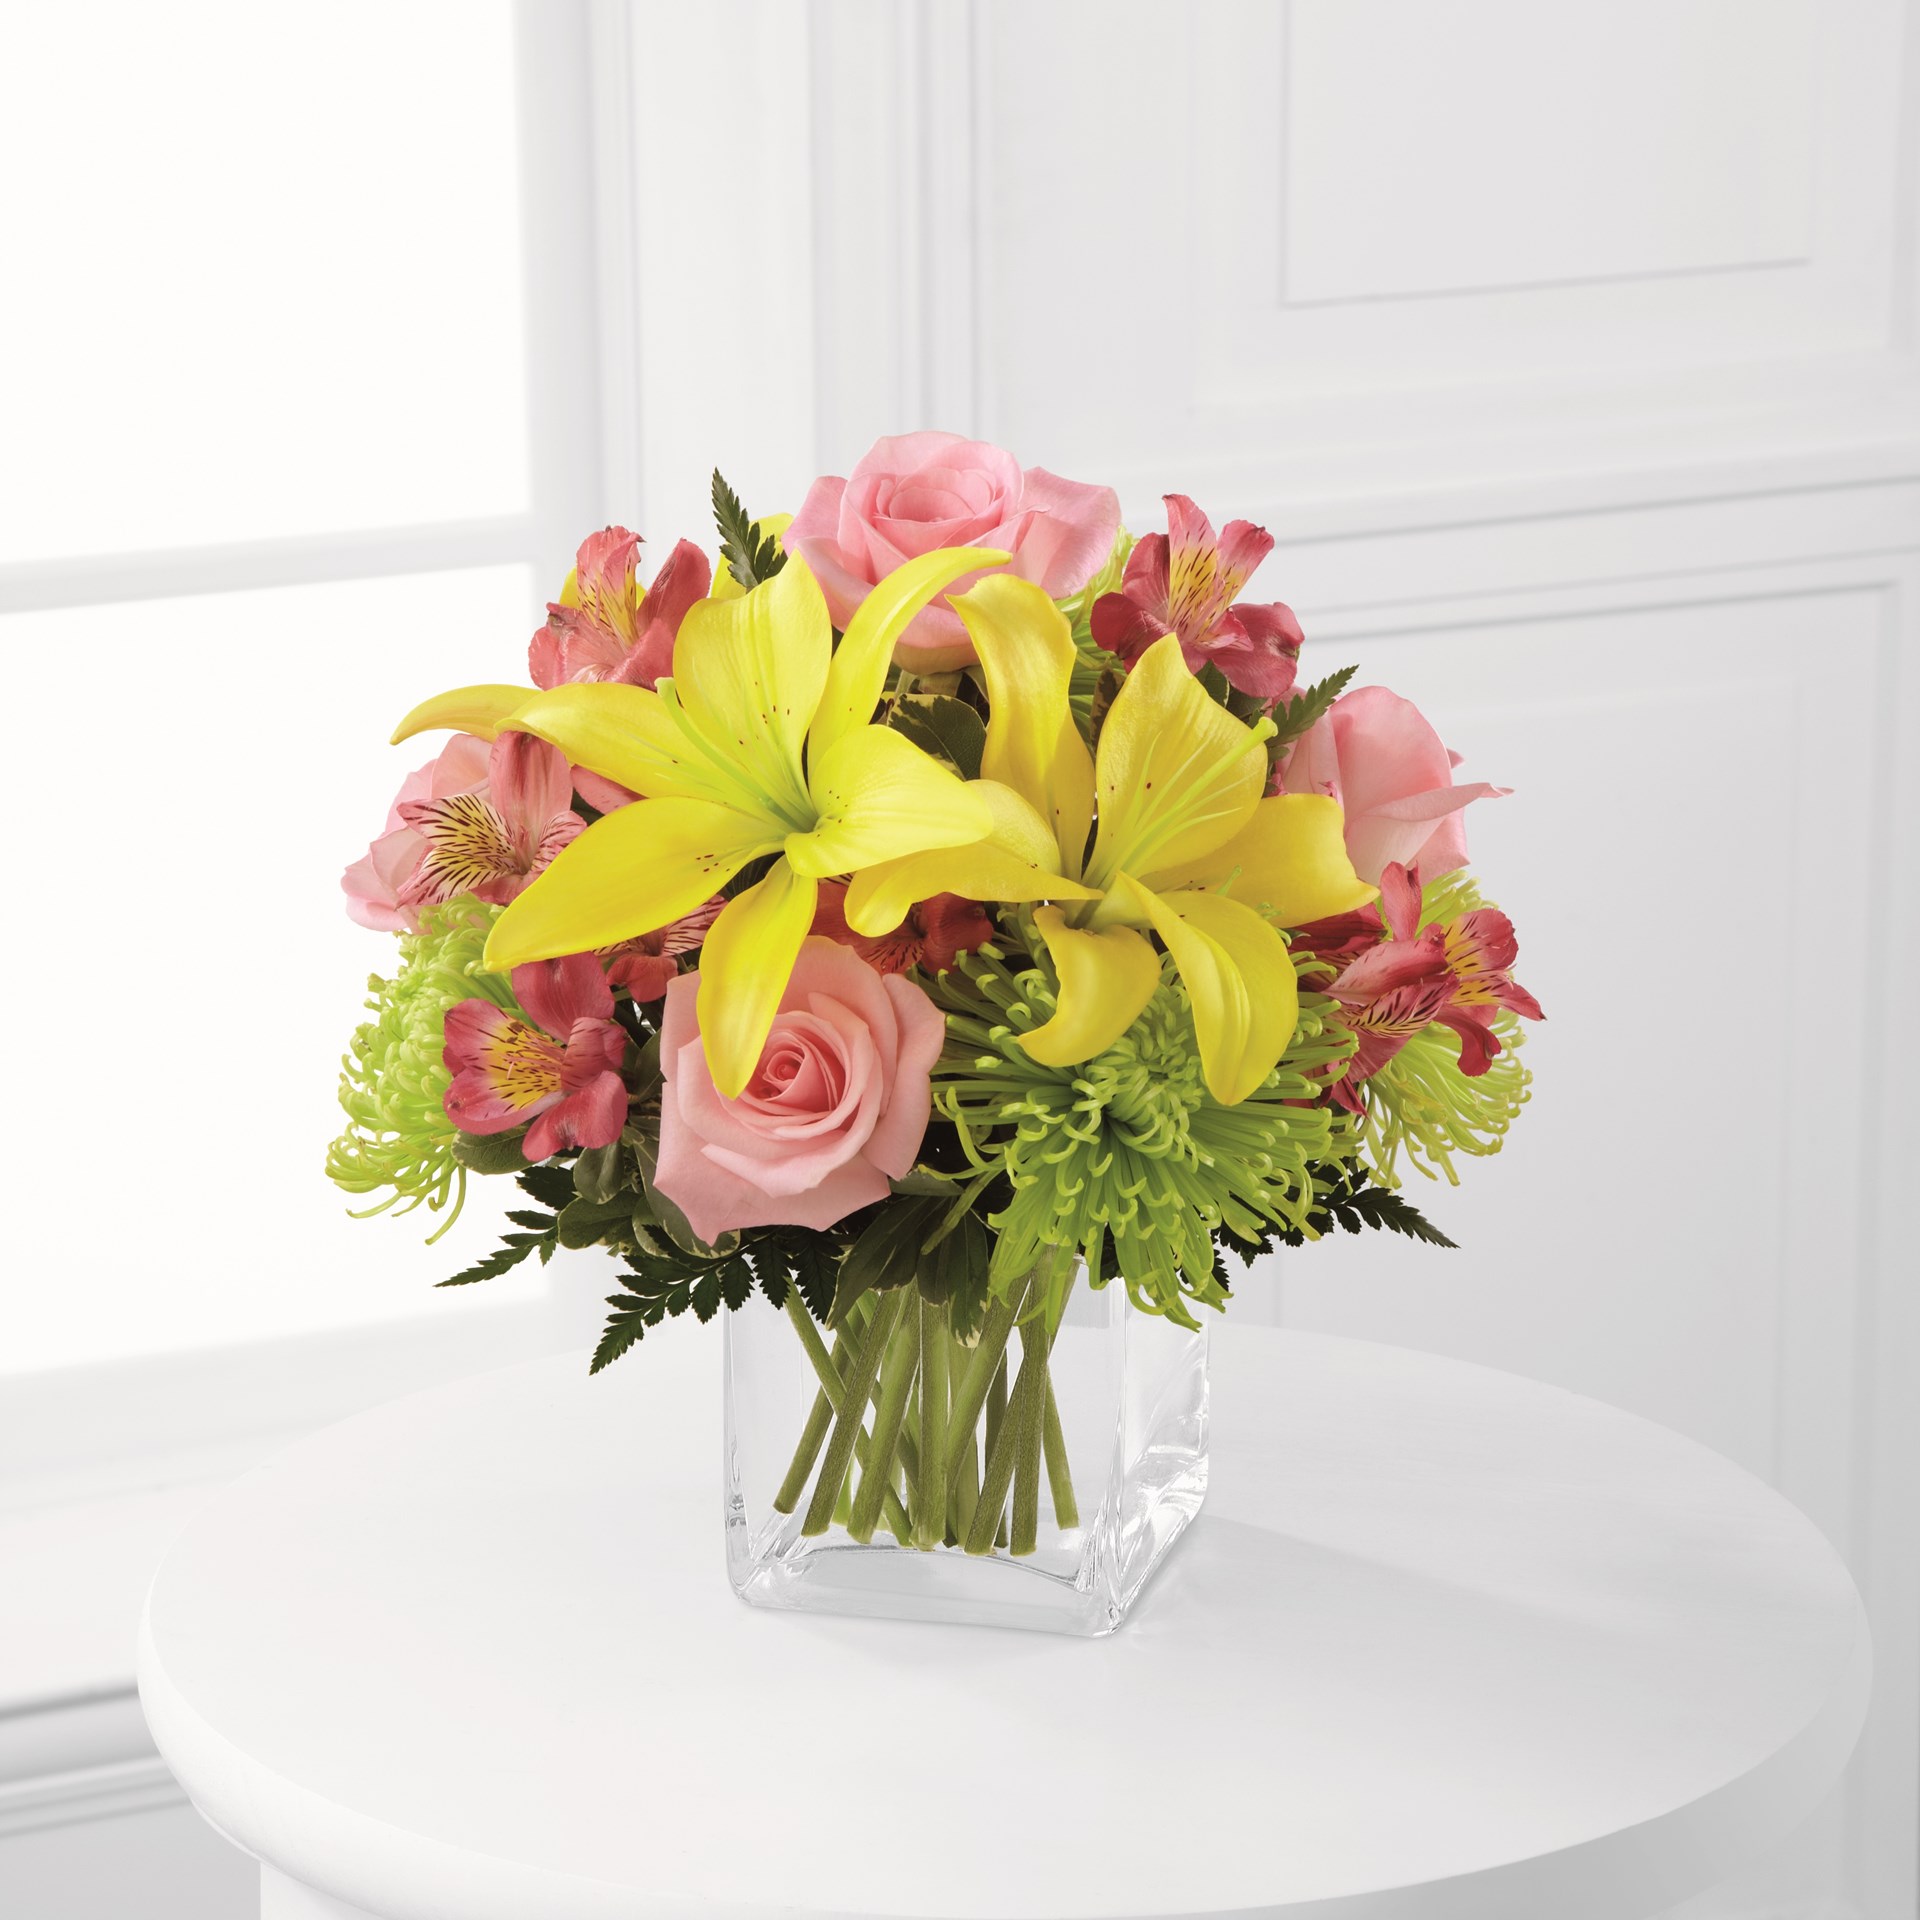 product image for The FTD Well Done Bouquet